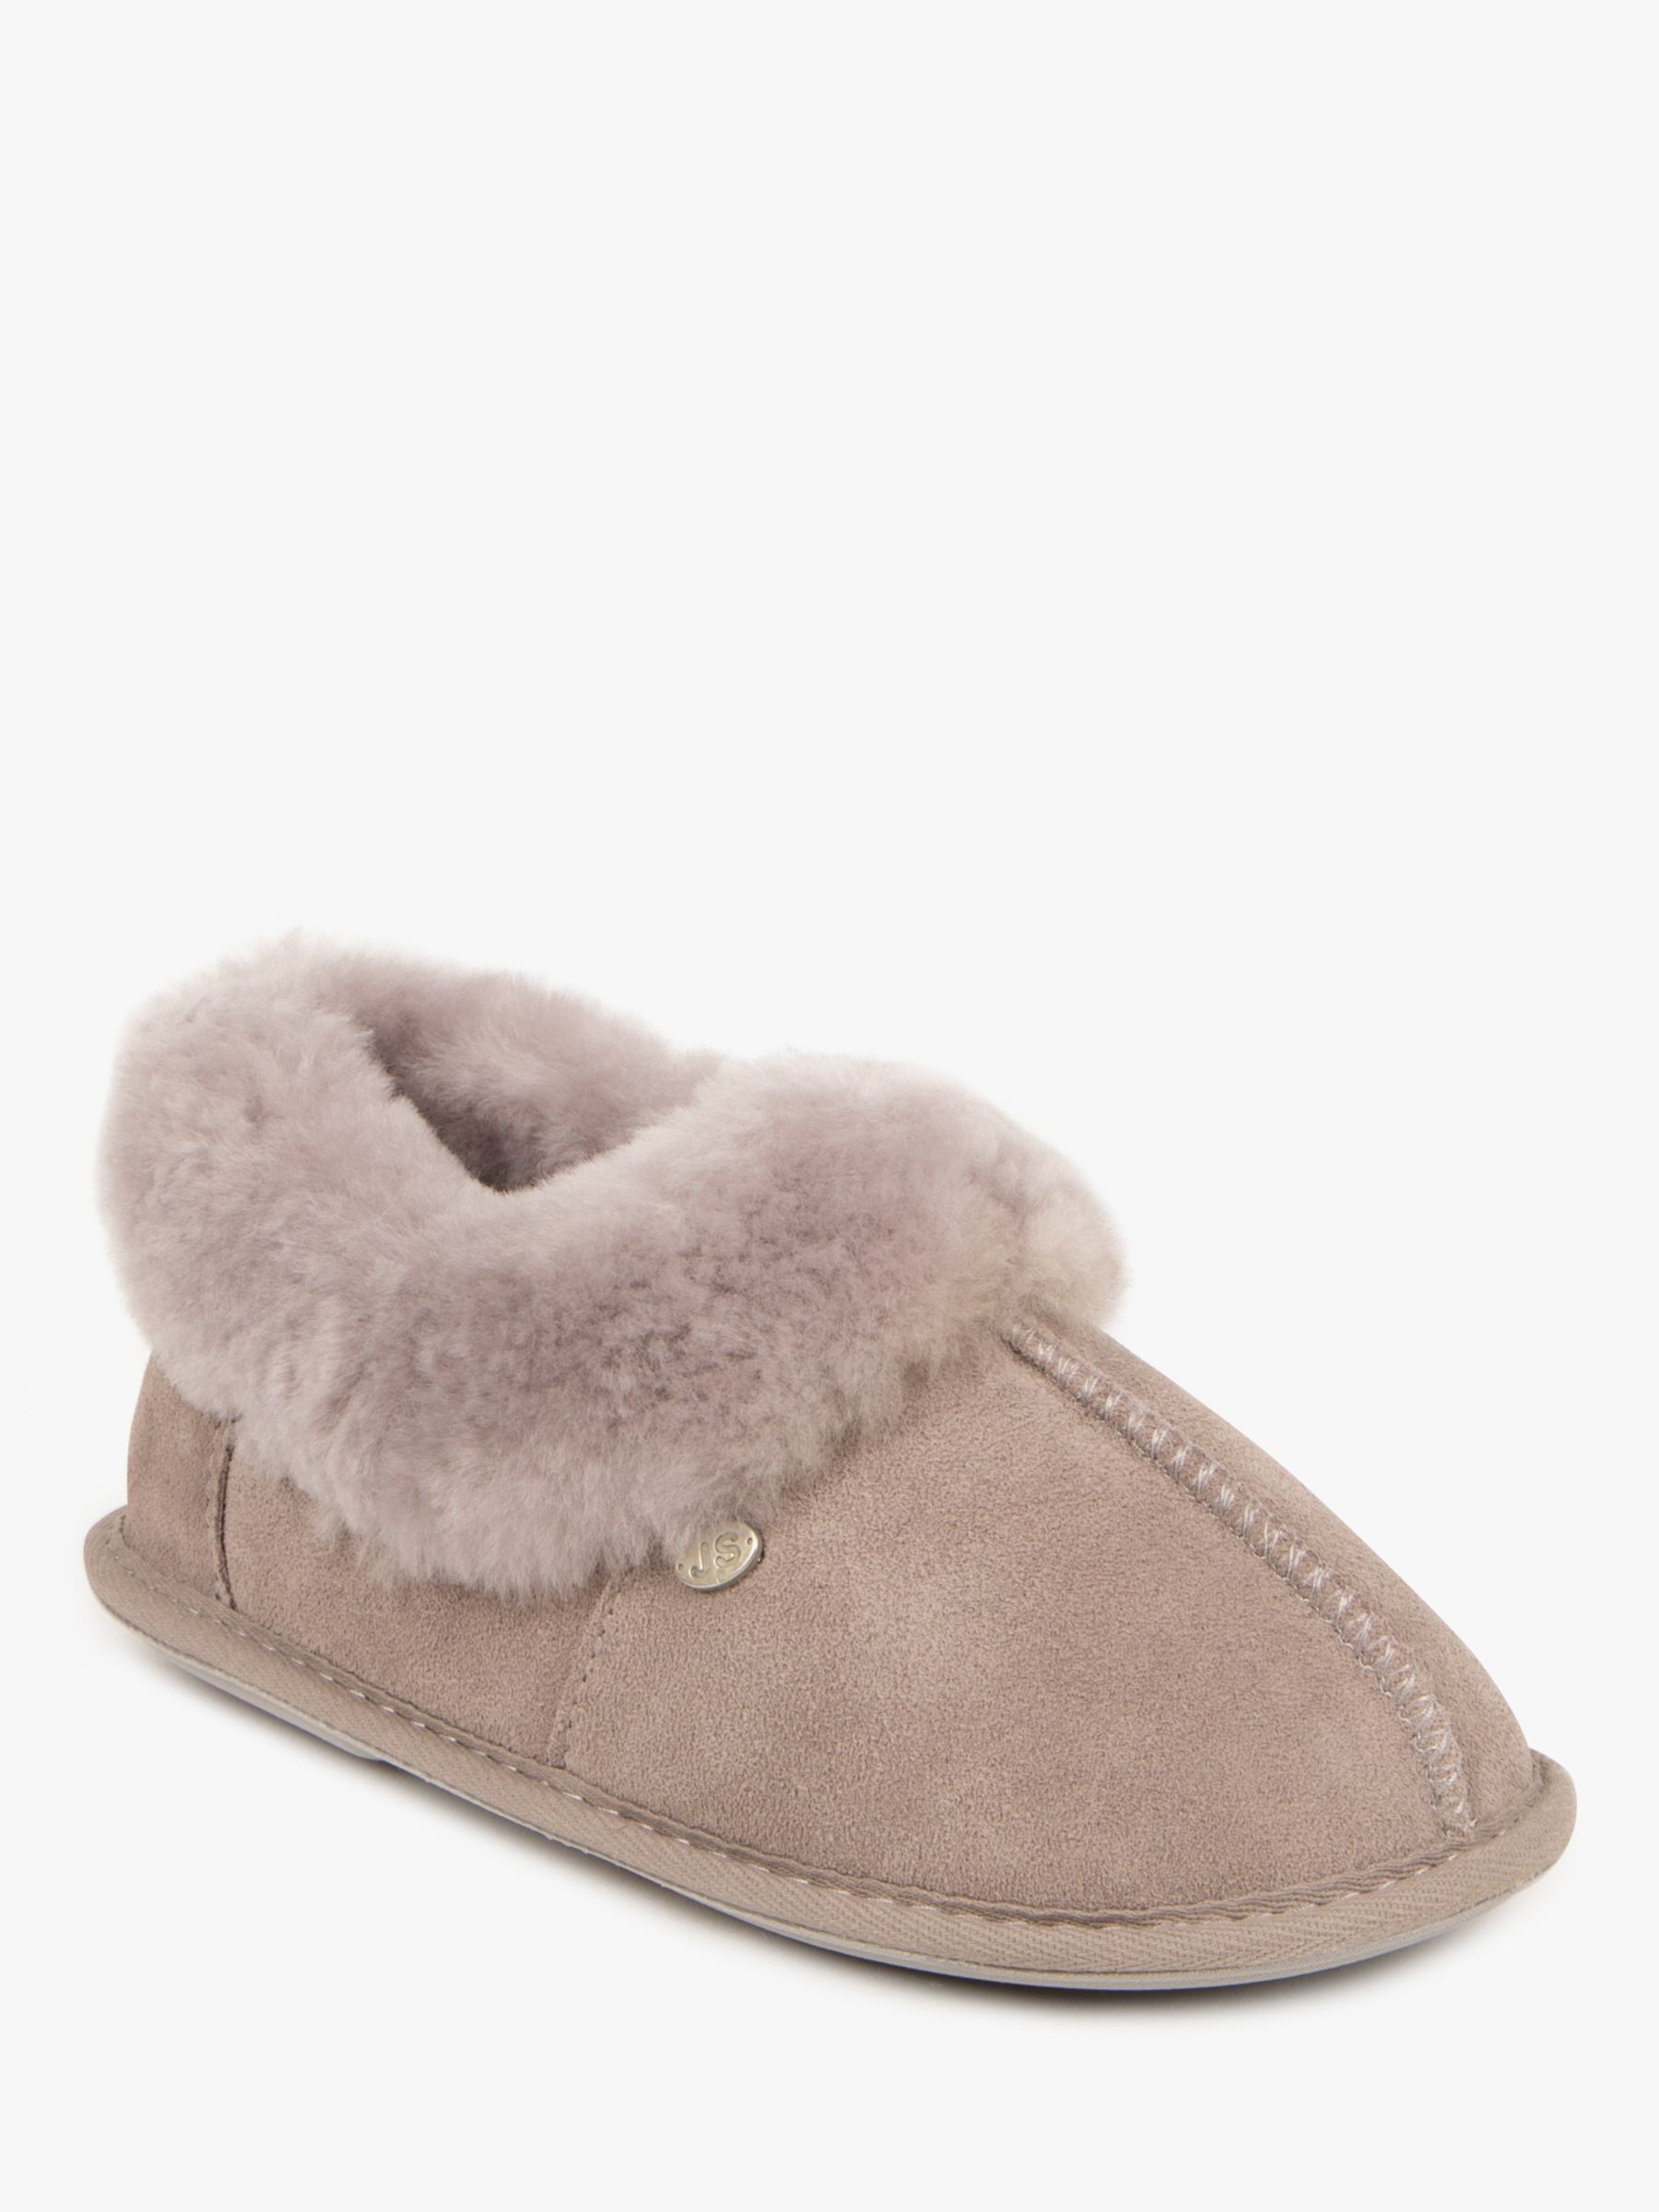 Buy Just Sheepskin Classic Suede Slippers Online at johnlewis.com